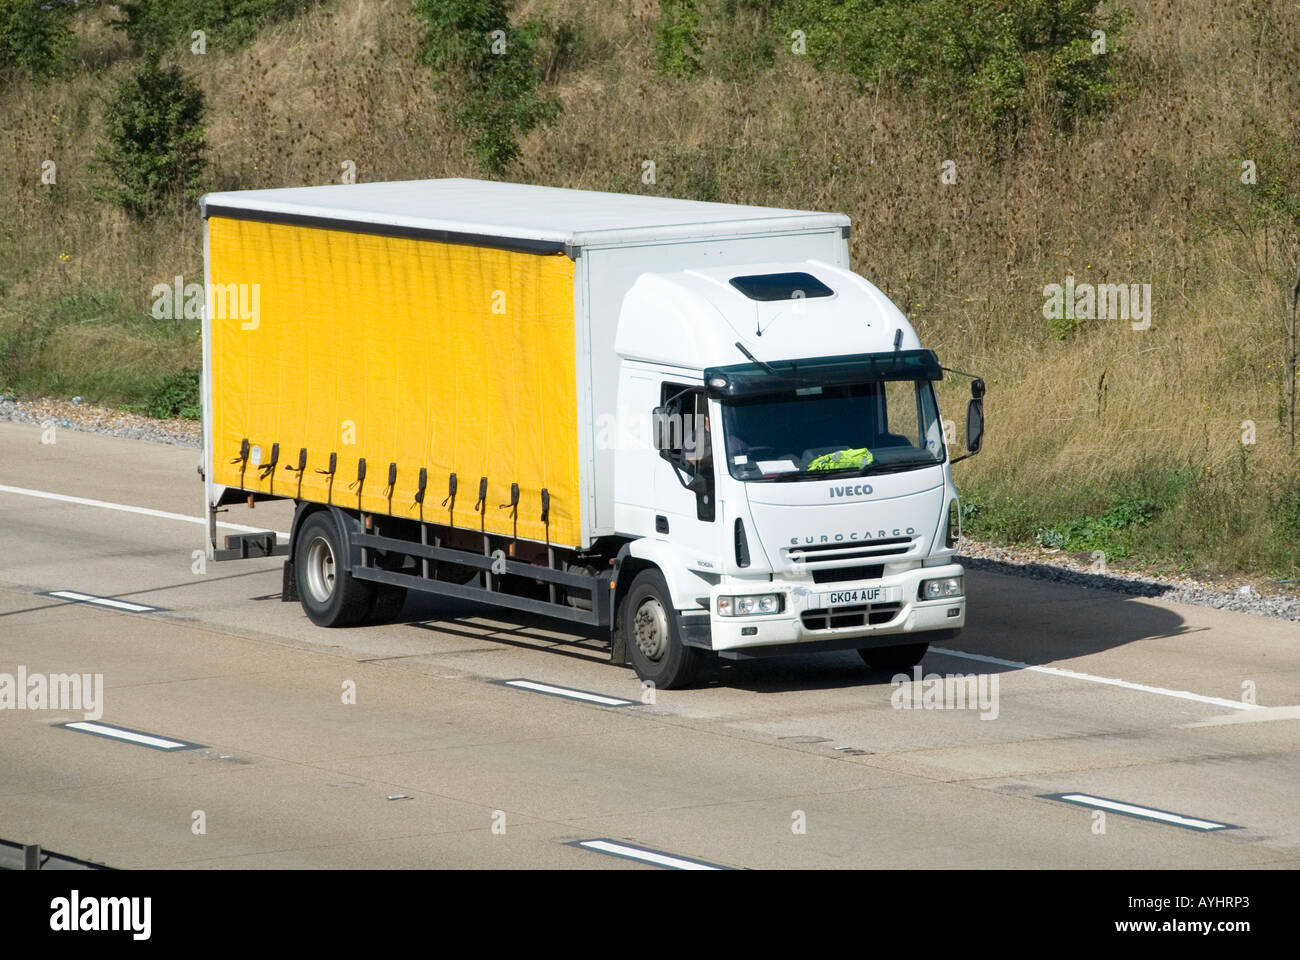 M25 motorway unmarked clean rigid base lorry with soft sides Stock Photo